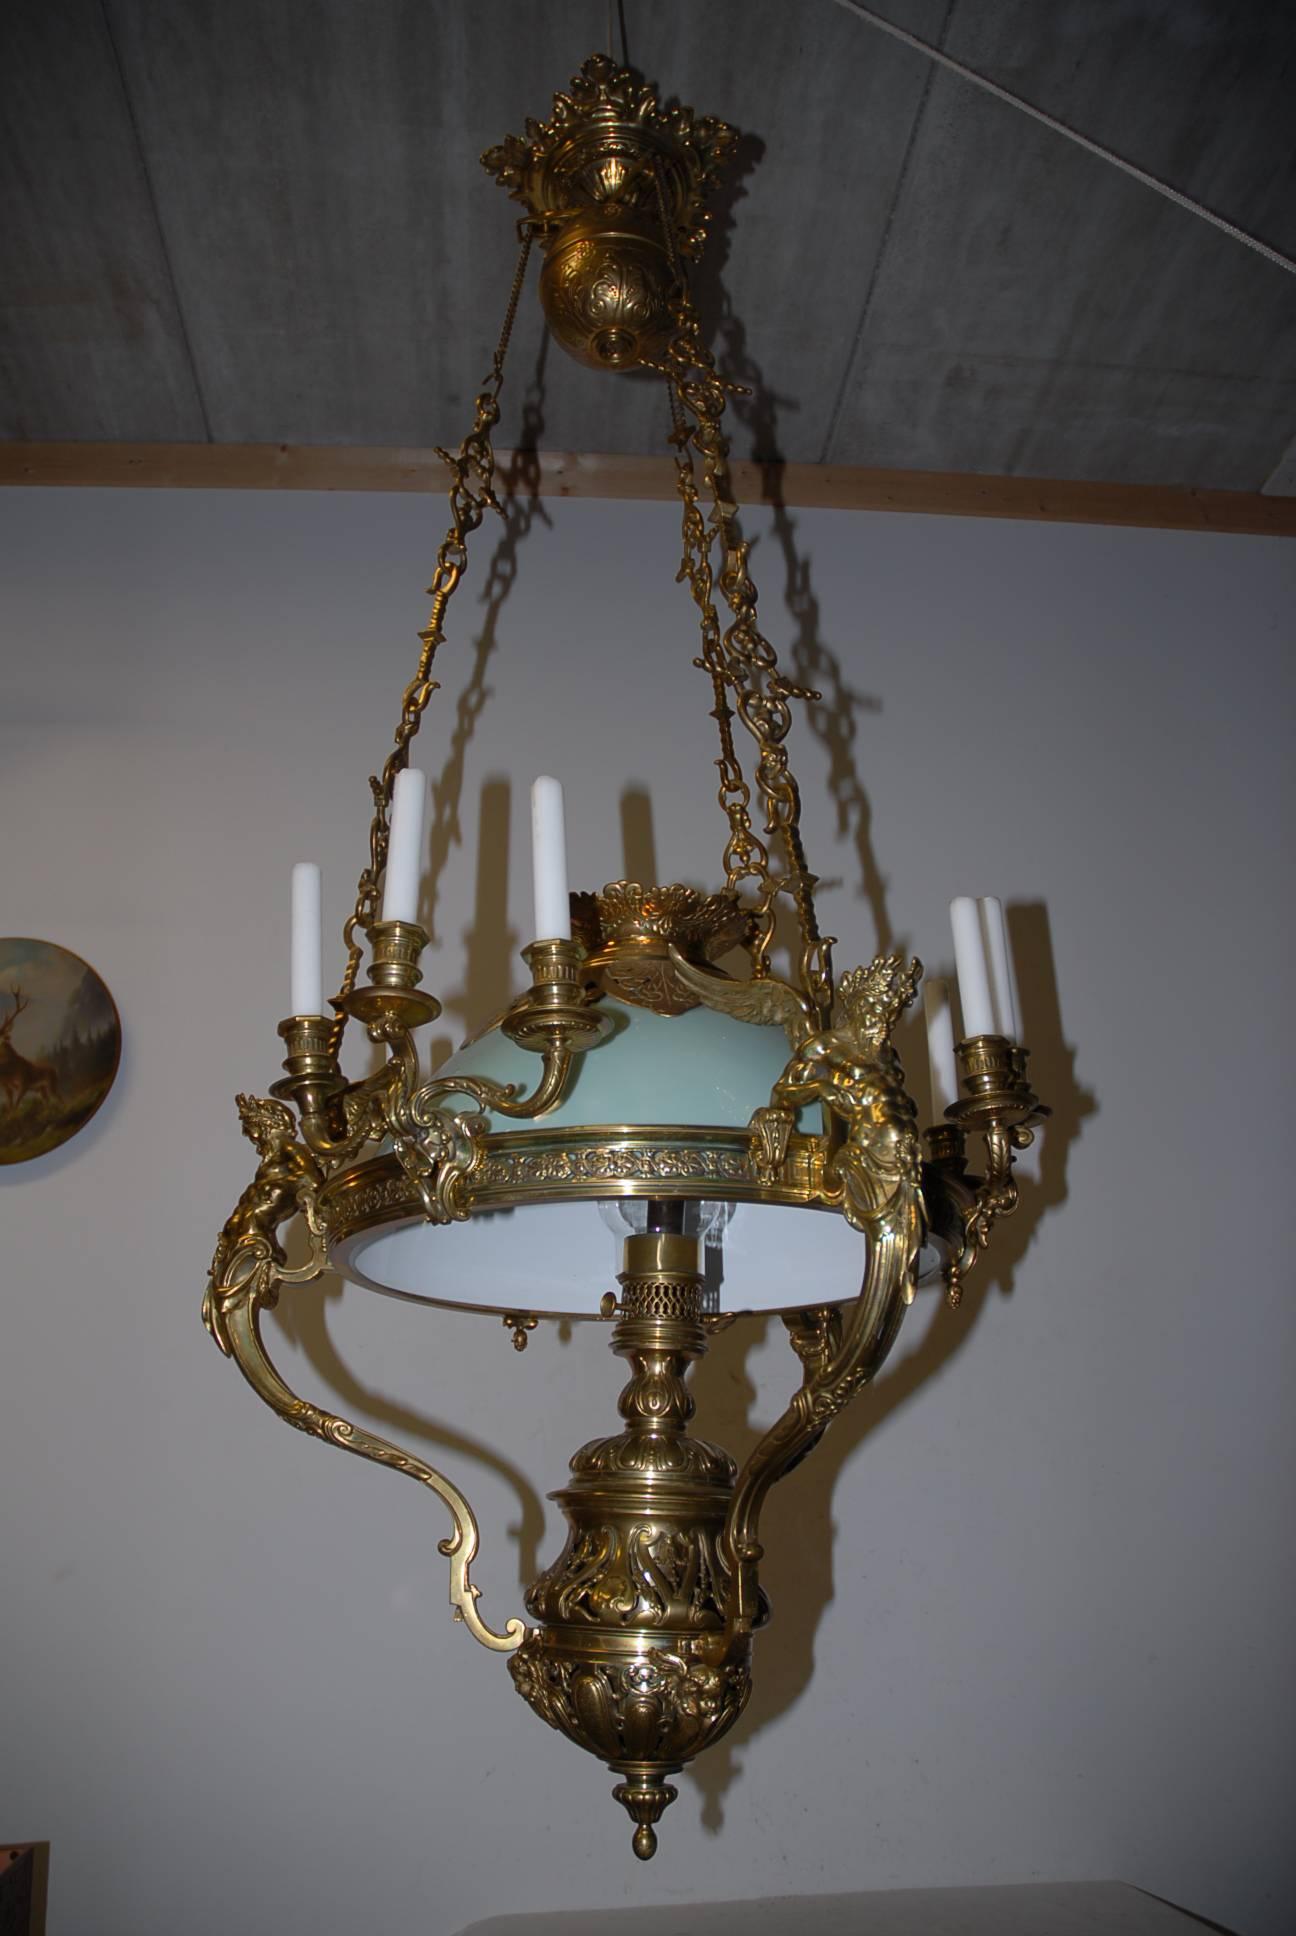 Unique bronze Zeus figures oil and candle ceiling light.

This large, heavy and finely detailed hanging oil lamp is probably unique. This stunning example comes with the original, green color shade. As you can see it is in the best possible